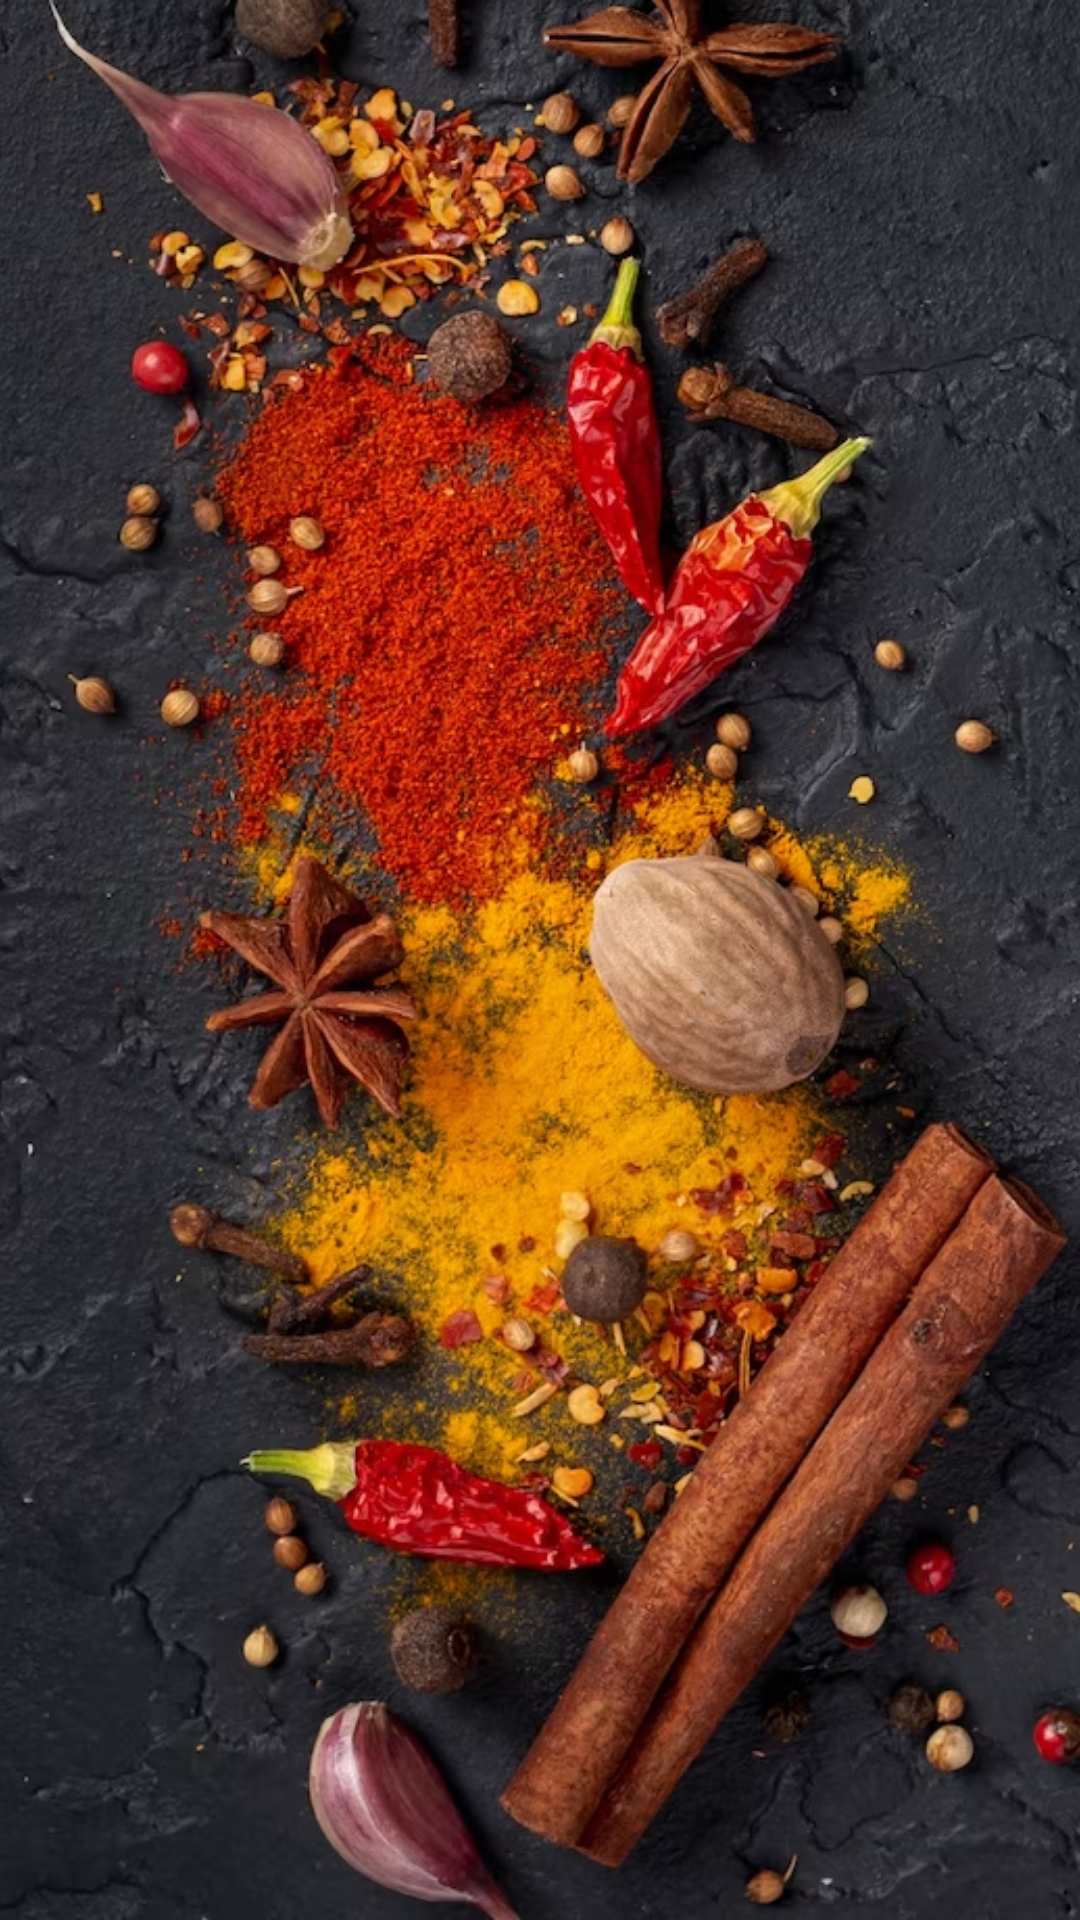 5 immunity booster spices to fight cold and flu this winter season